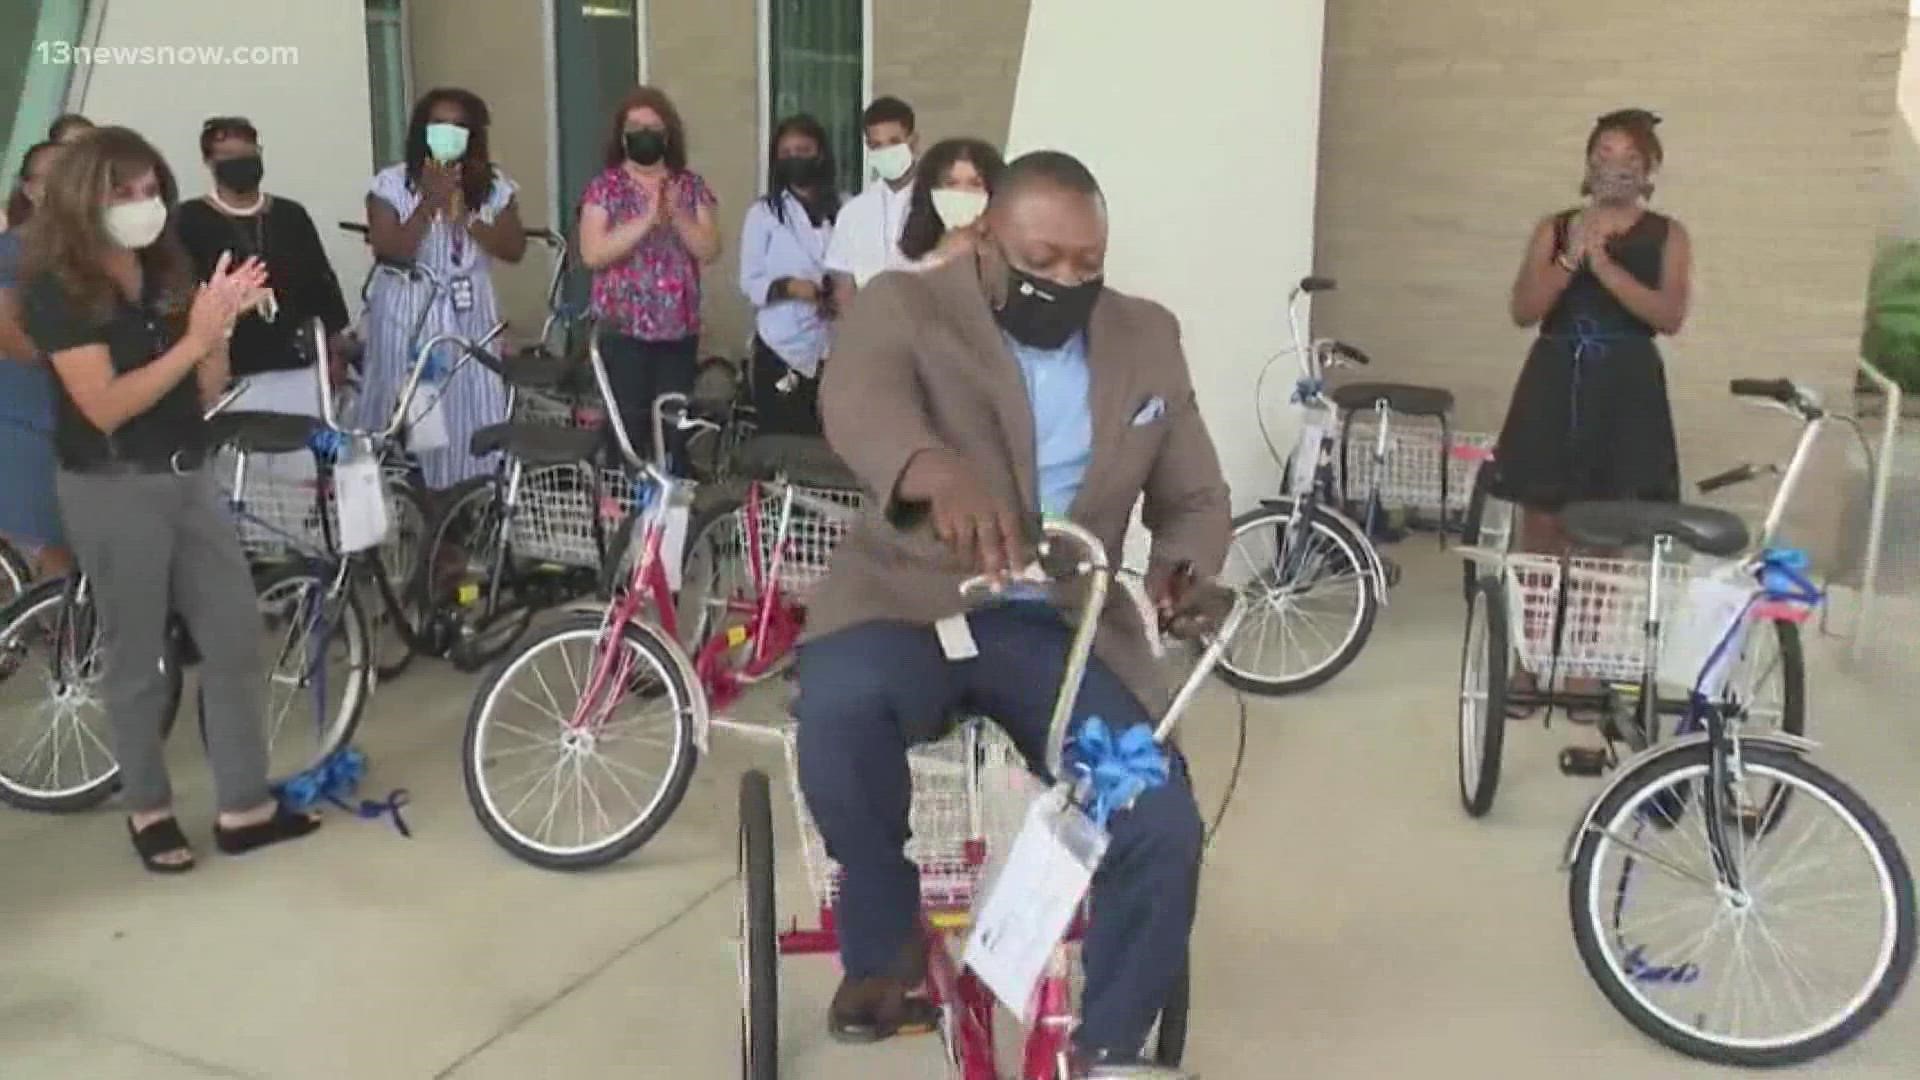 School division staff members will use the bikes to visit neighborhoods and deliver books directly to students.